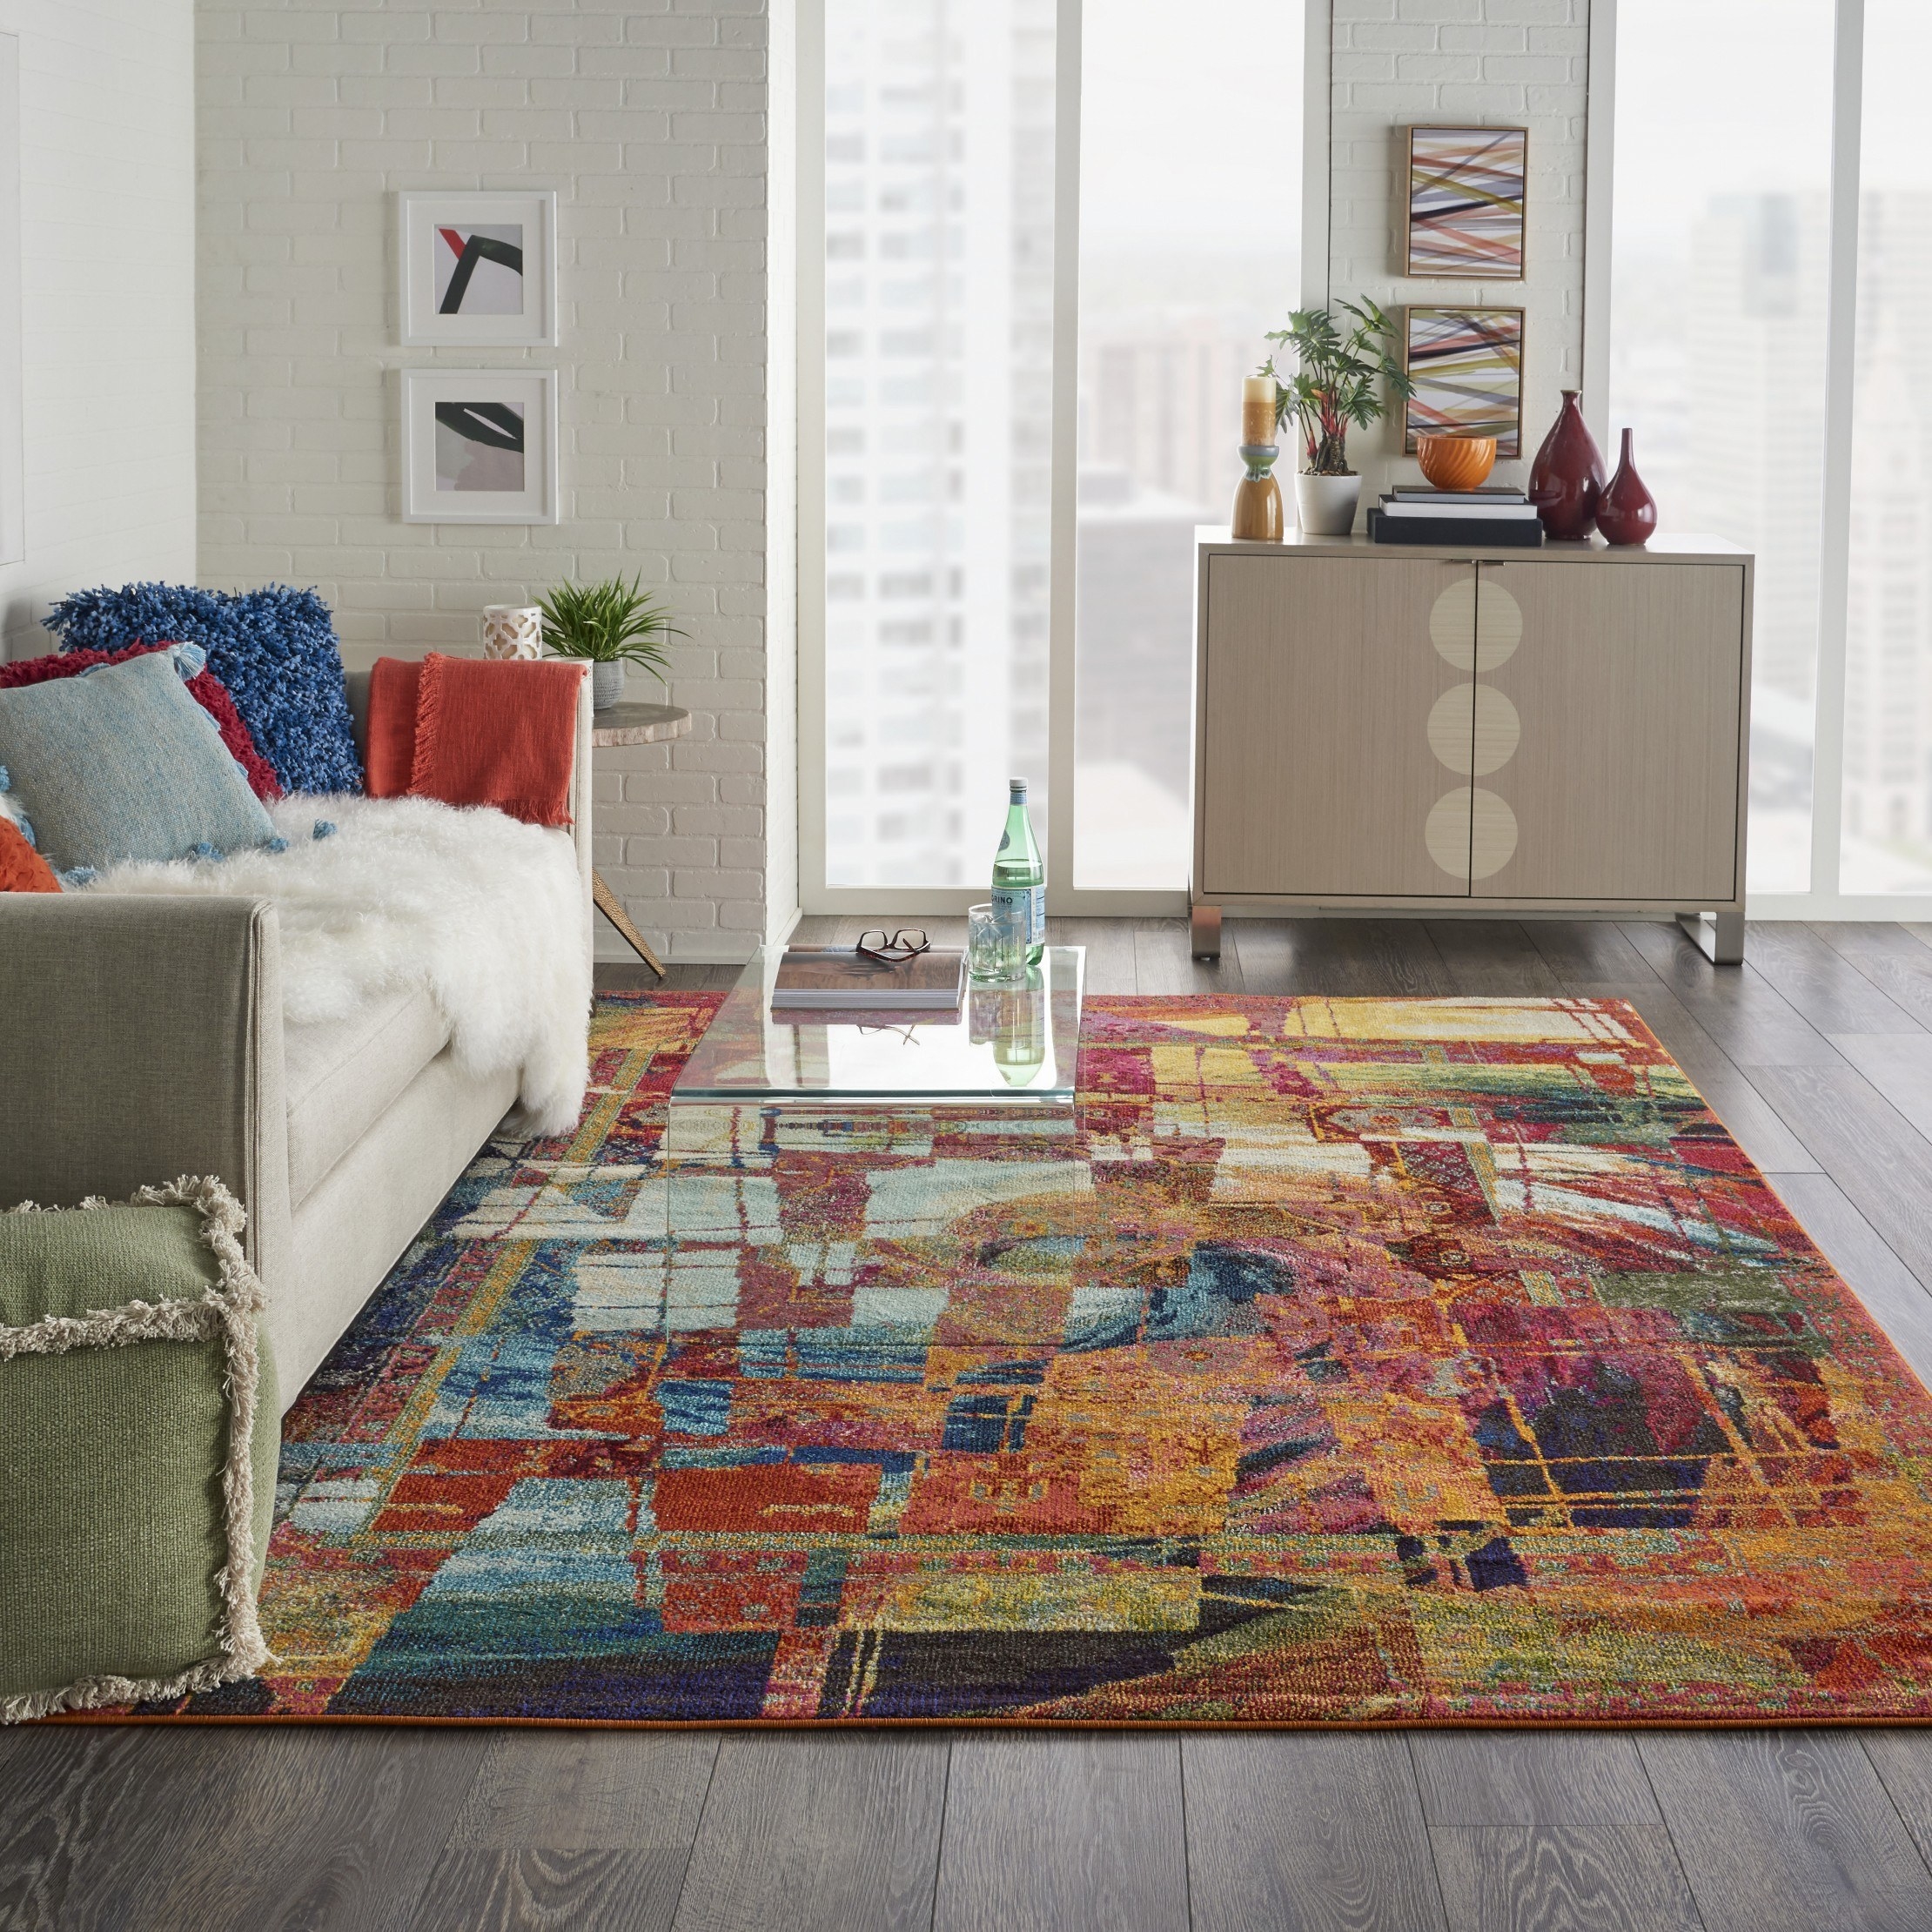 A mosaic colorful abstract rug.